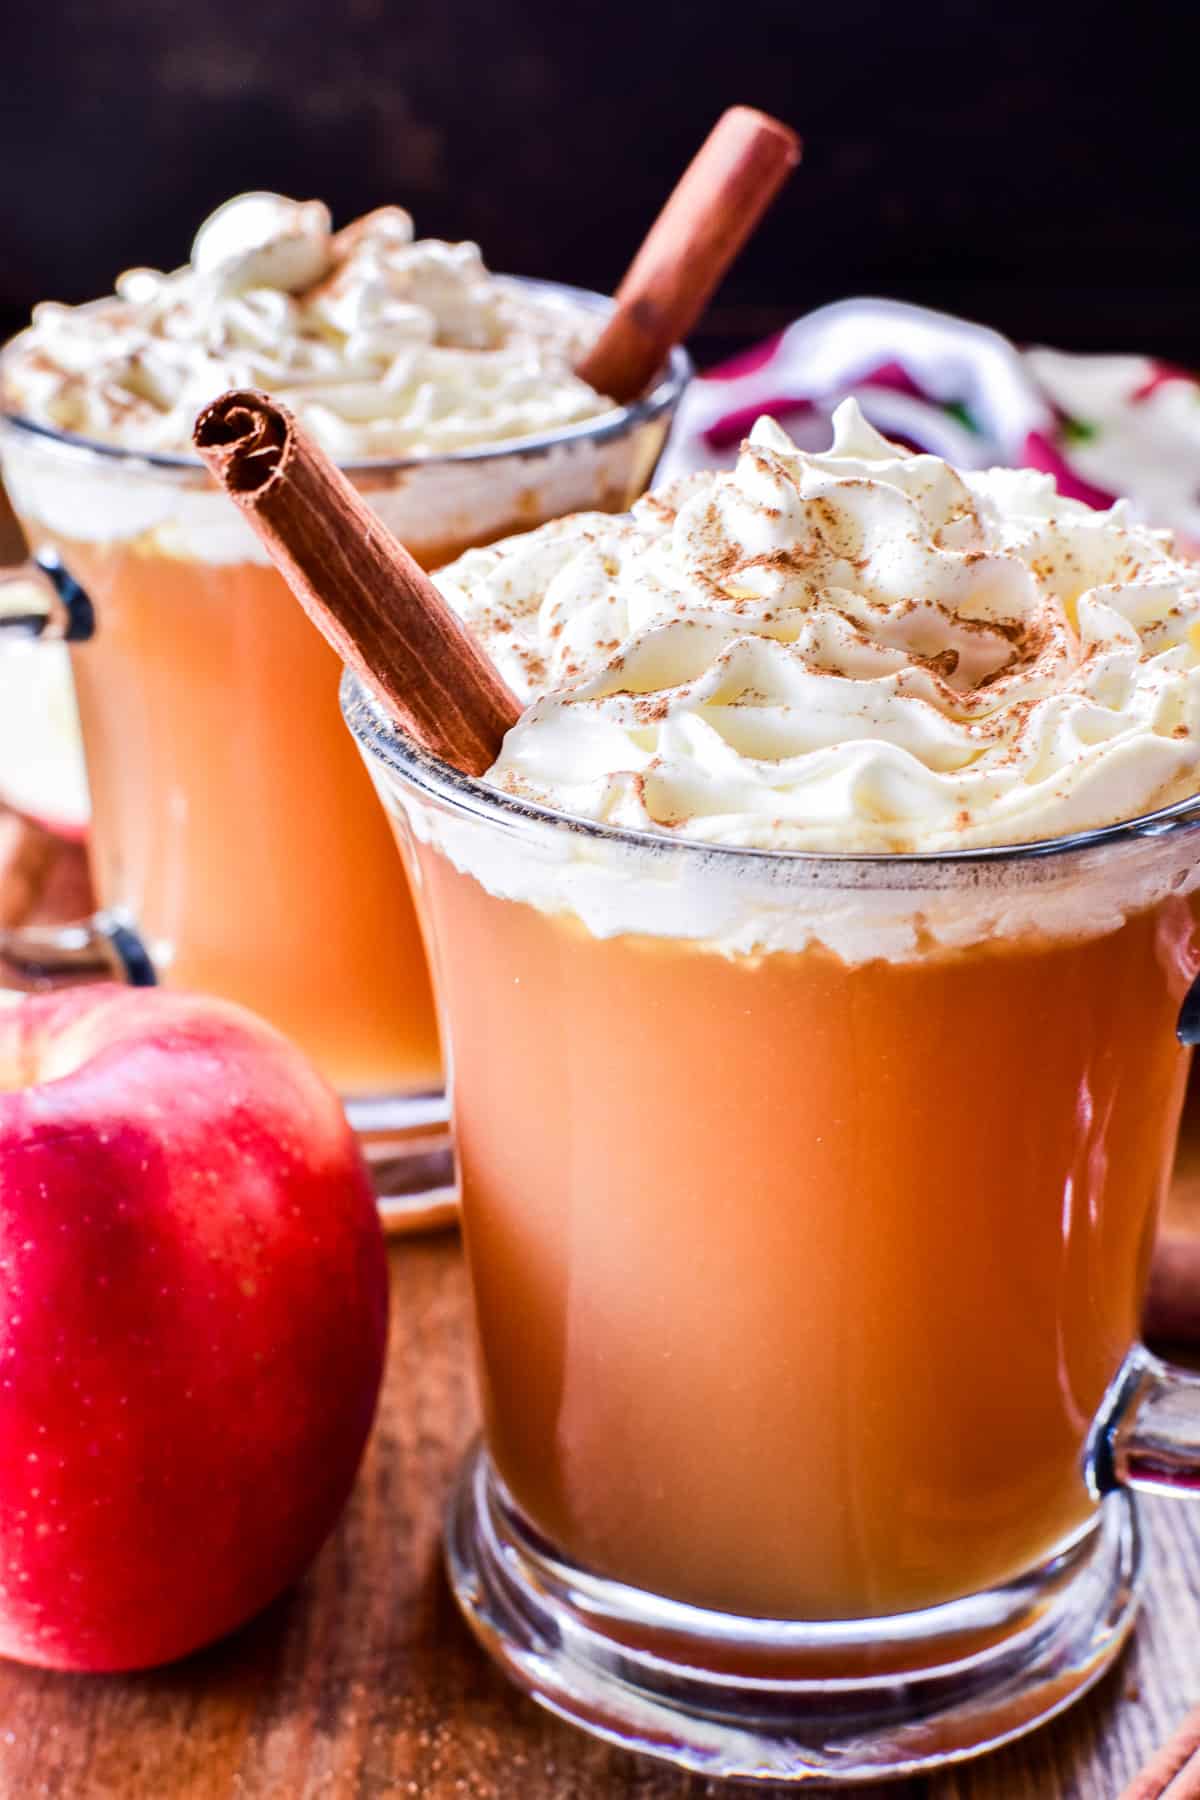 Close up of Spiked Apple Cider in a glass mug